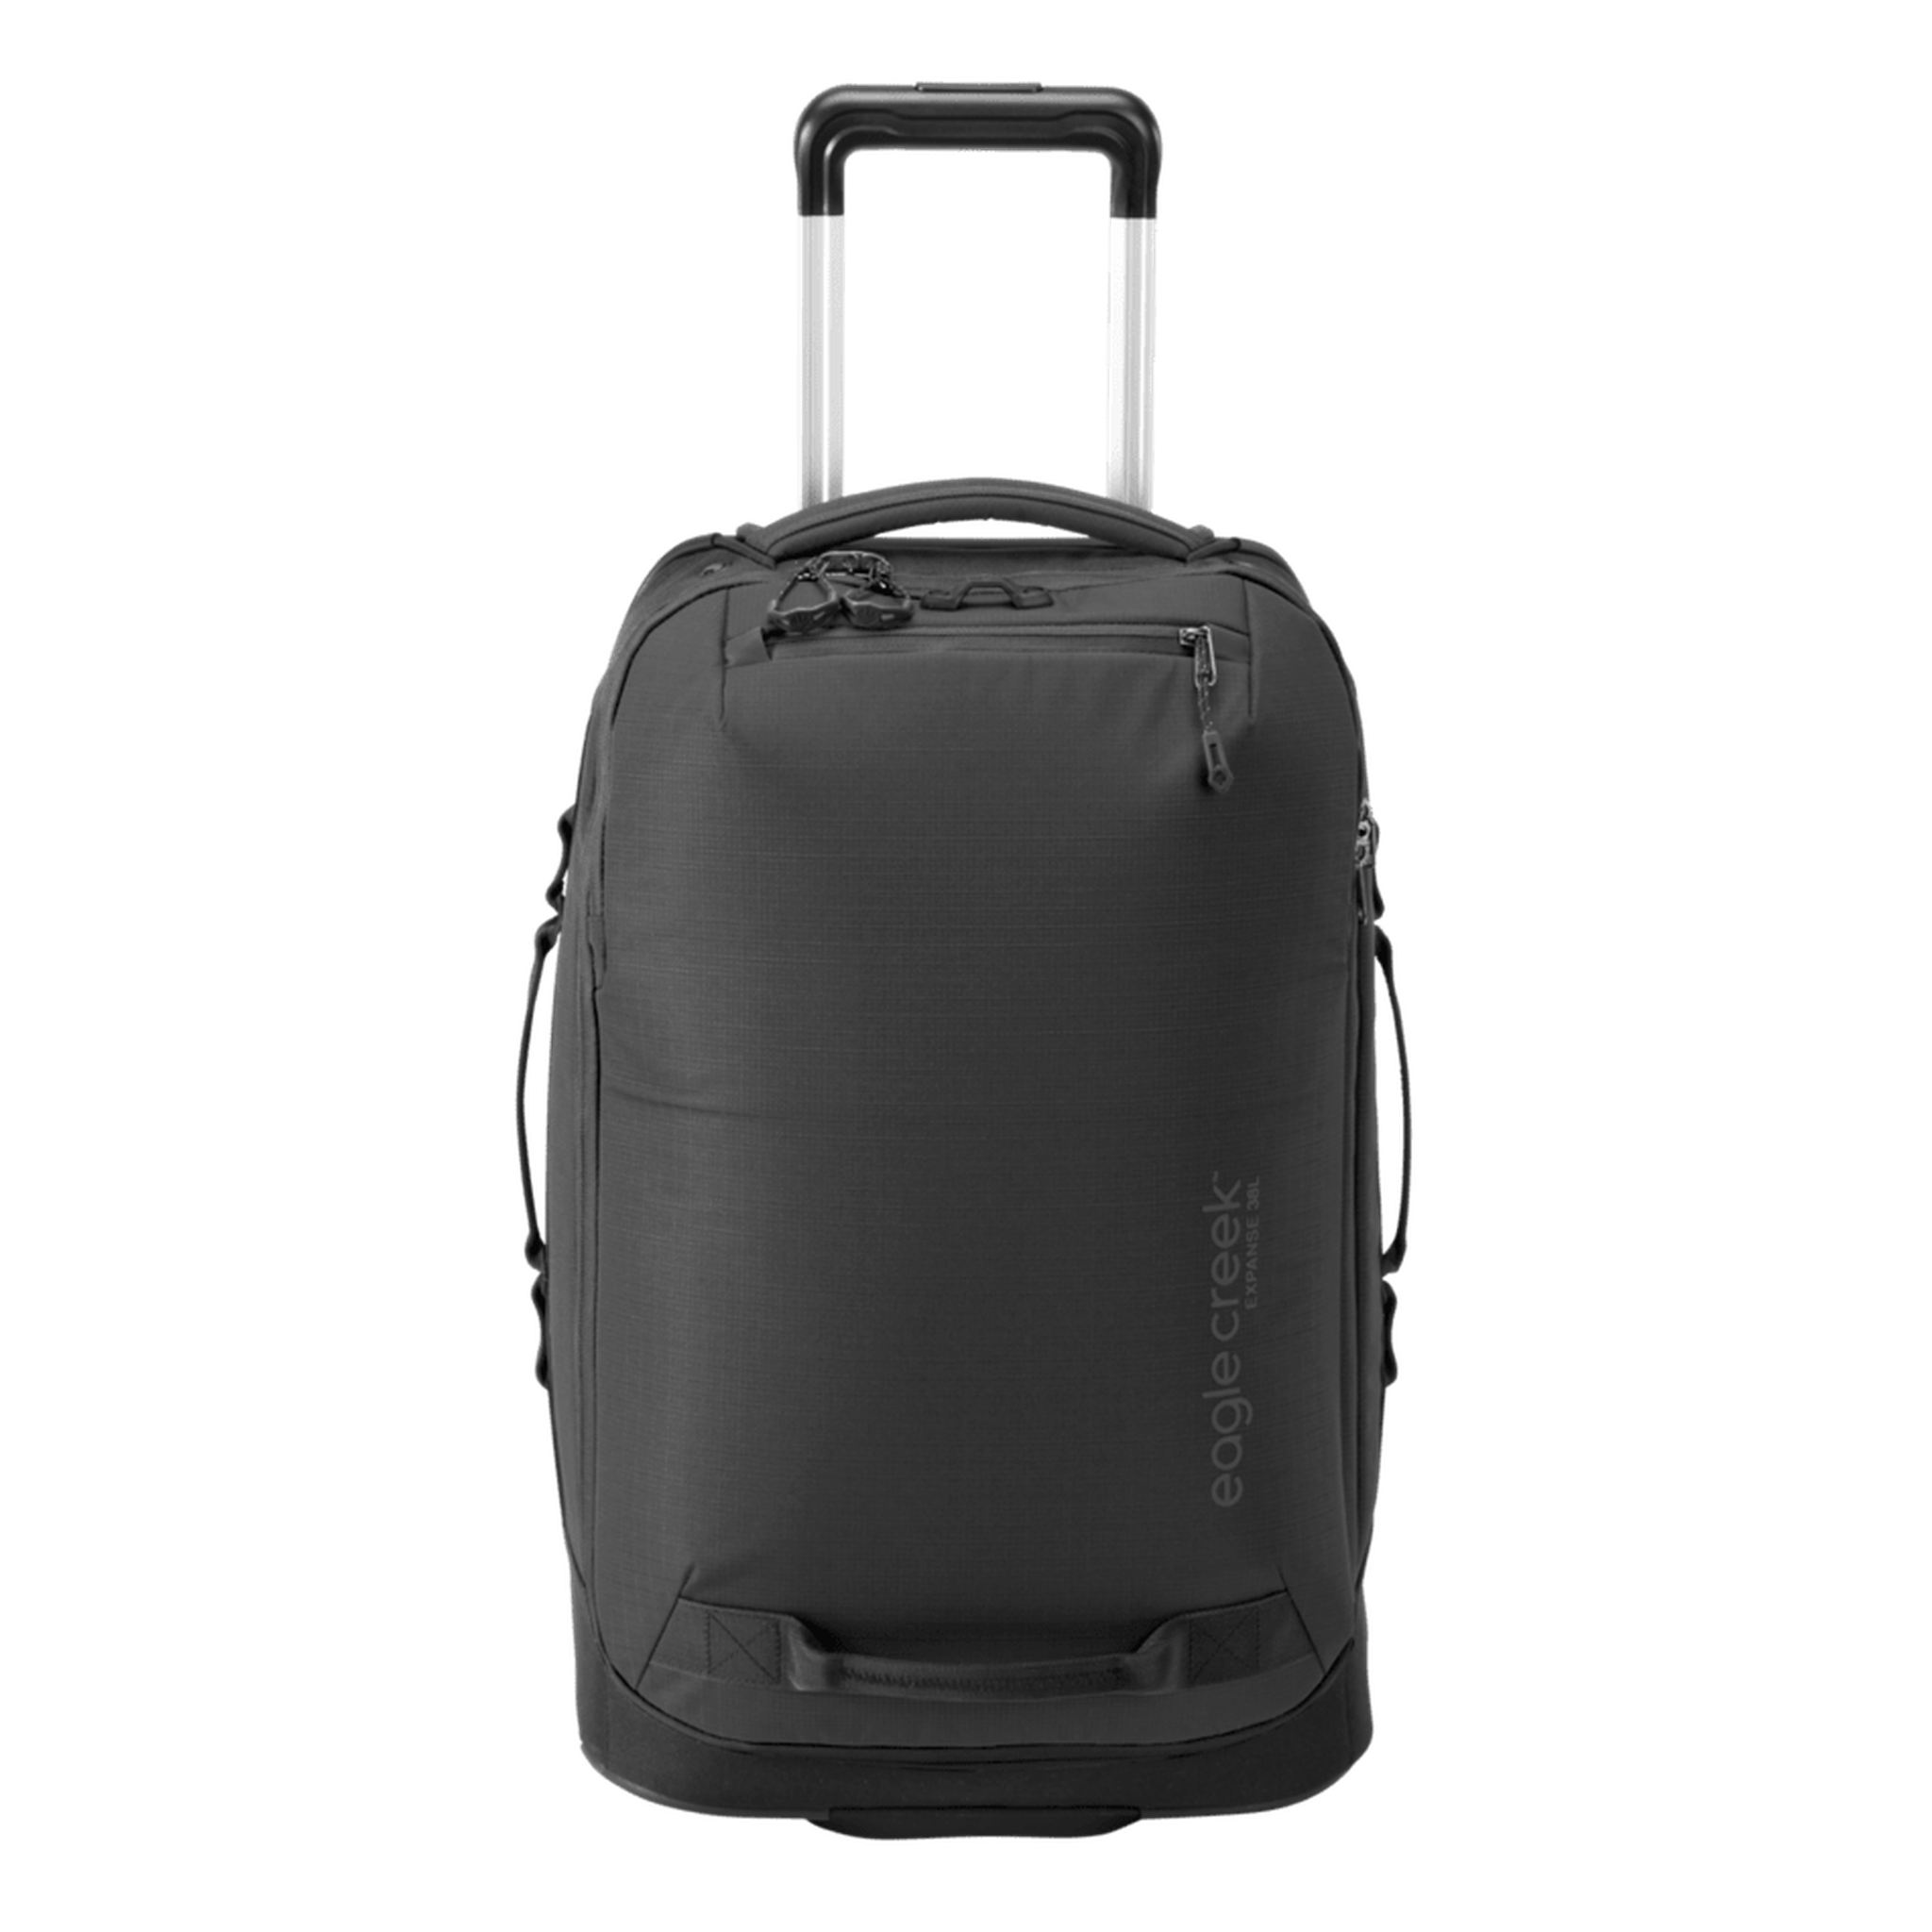 Lightweight Luggage for International Travel Pilot Luggage Big Lots Luggage  - China Carry on Luggage and Travel Case price | Made-in-China.com